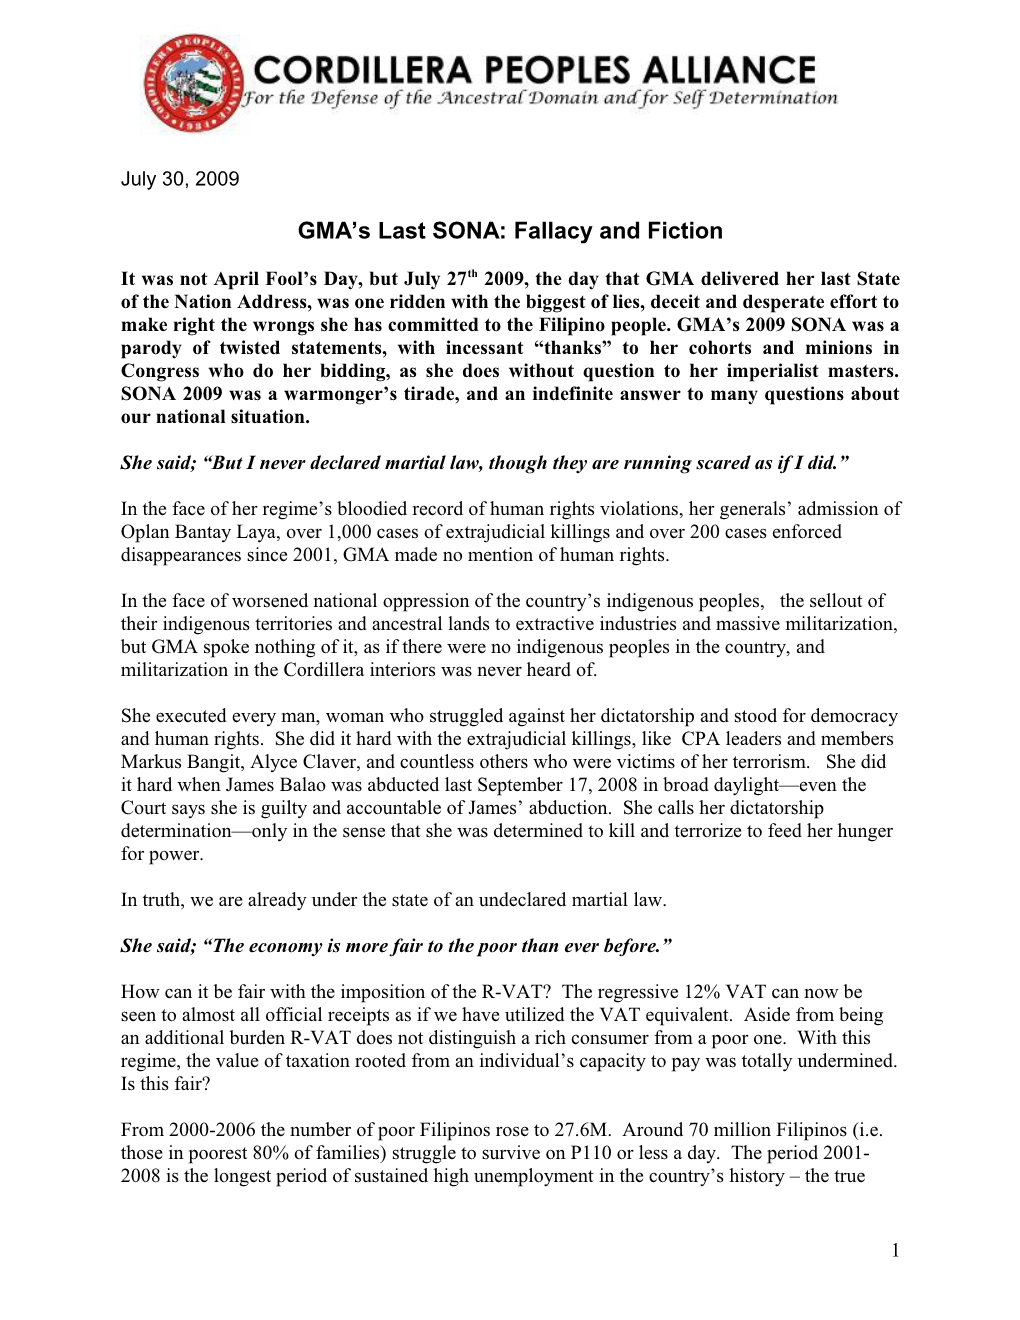 Notes for Critique of SONA 2009